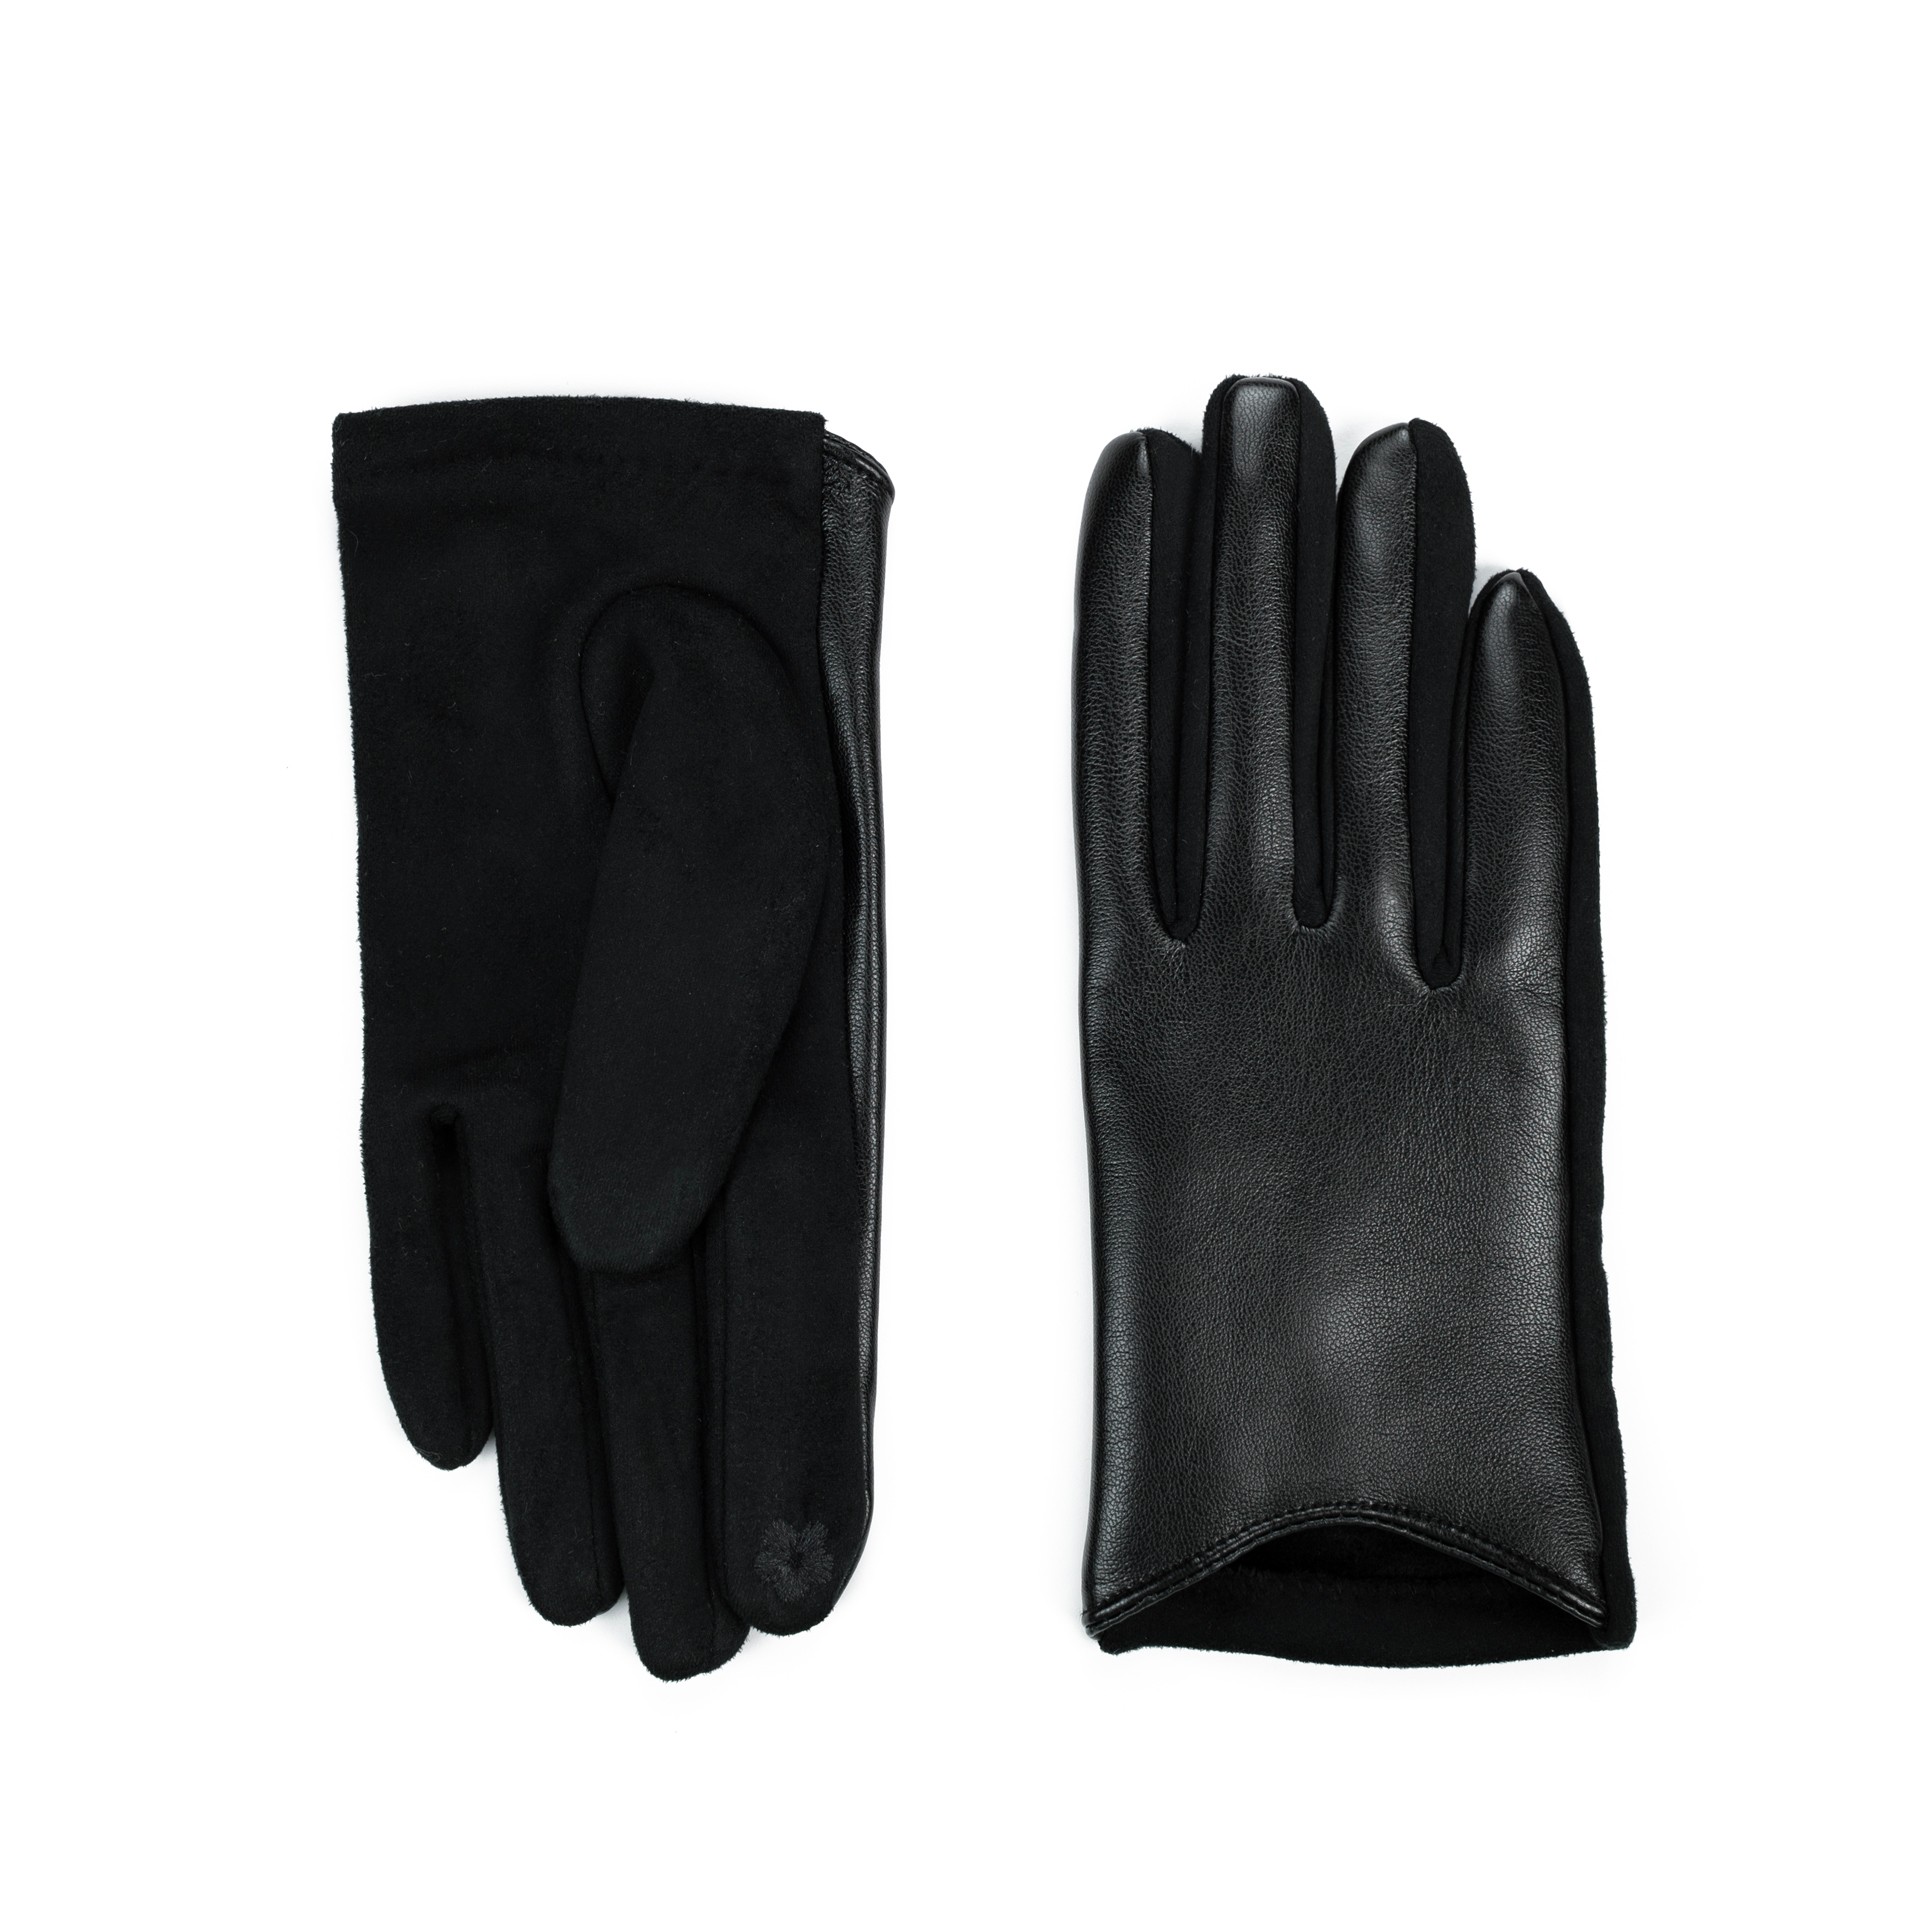 Art Of Polo Woman's Gloves Rk23392-10